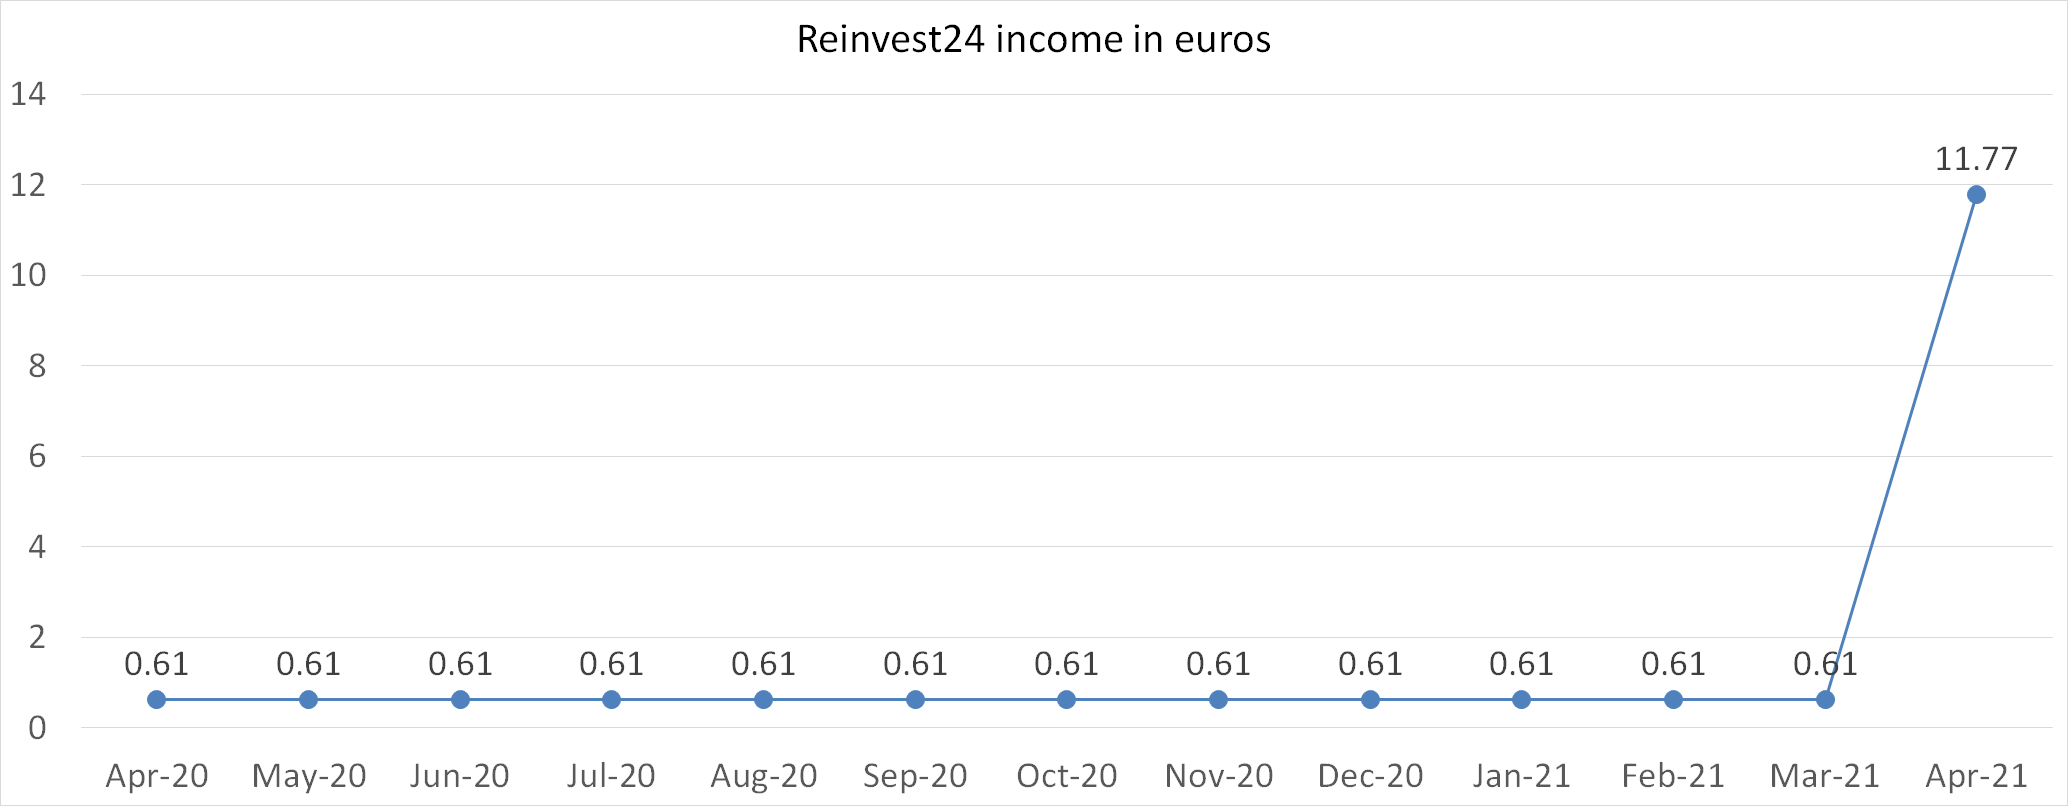 Reinvest24 income in april 2021